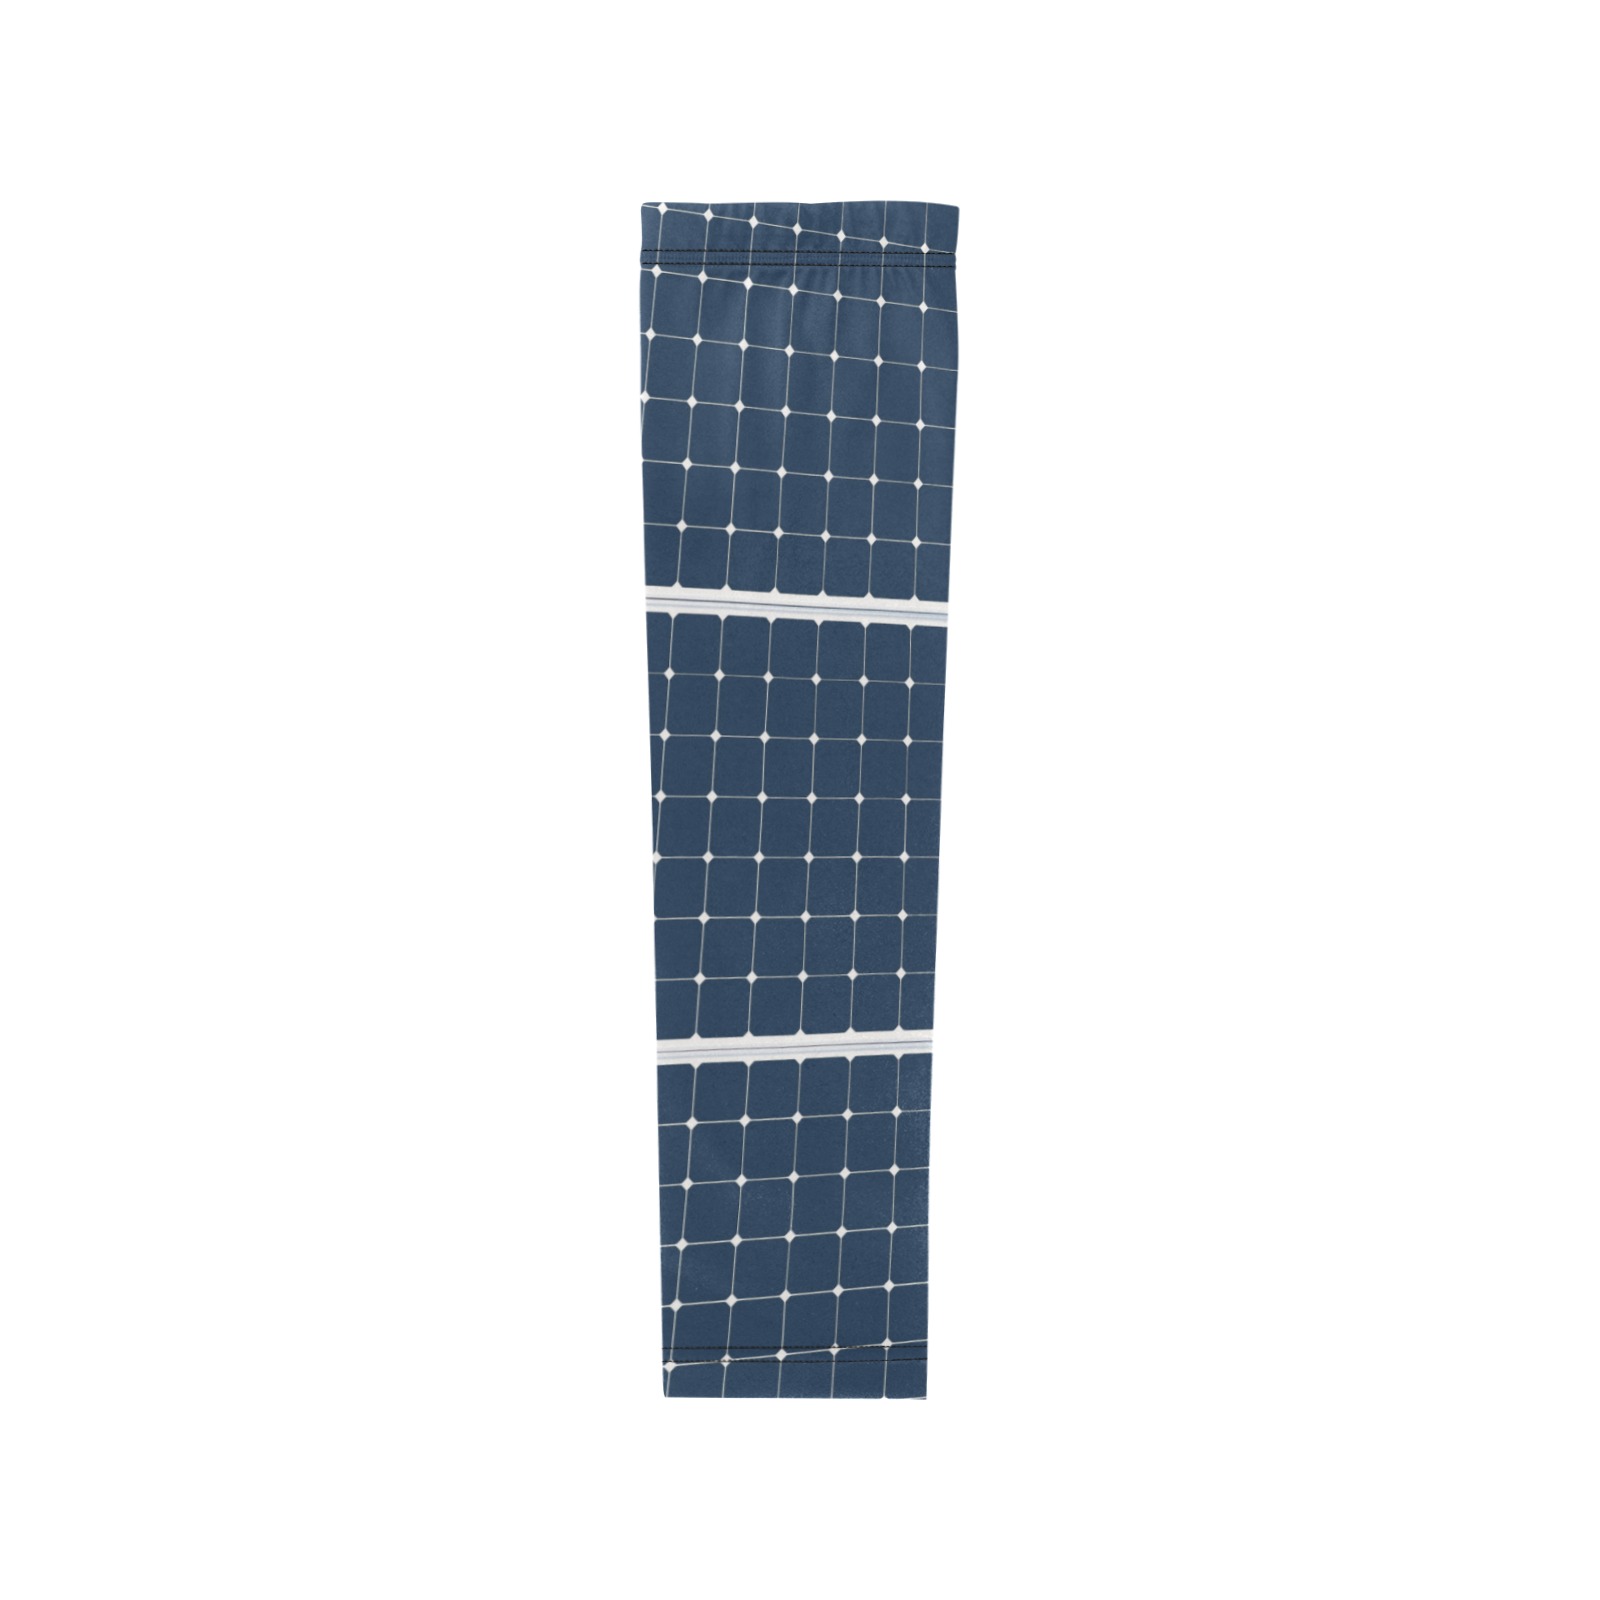 Sun Power Arm Sleeves (Set of Two)